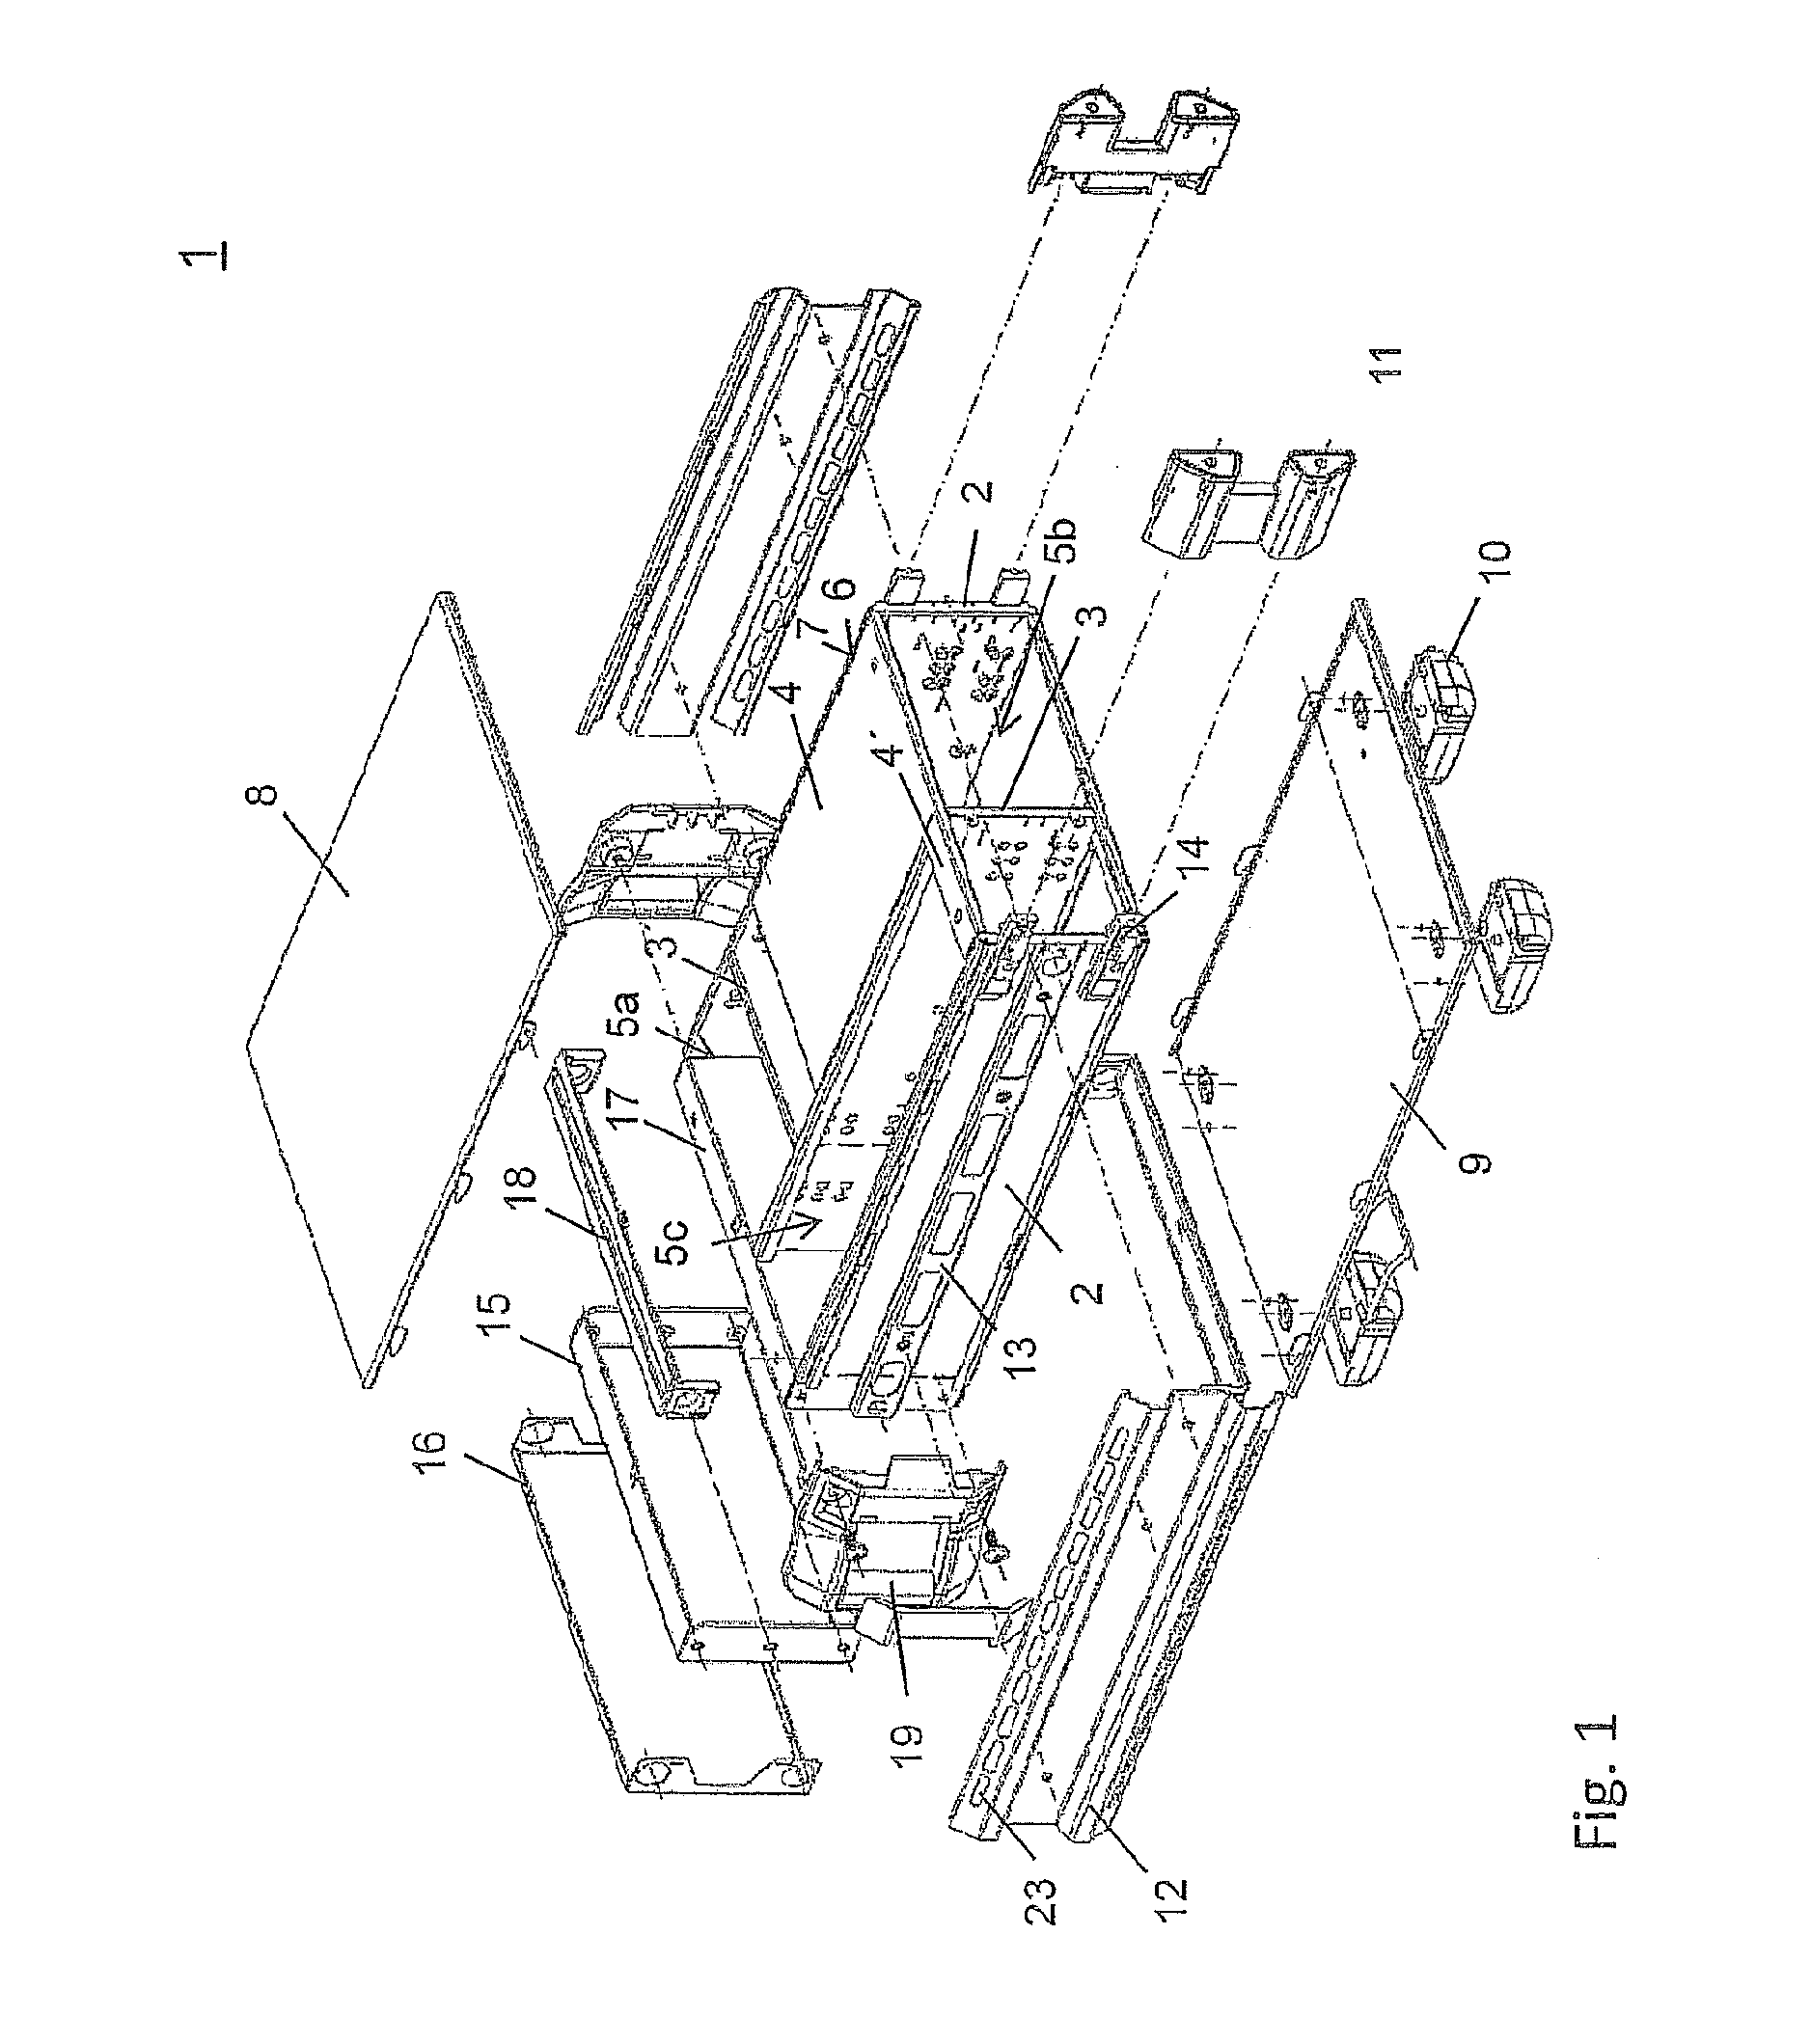 Box-frame housing and a method of manufacture